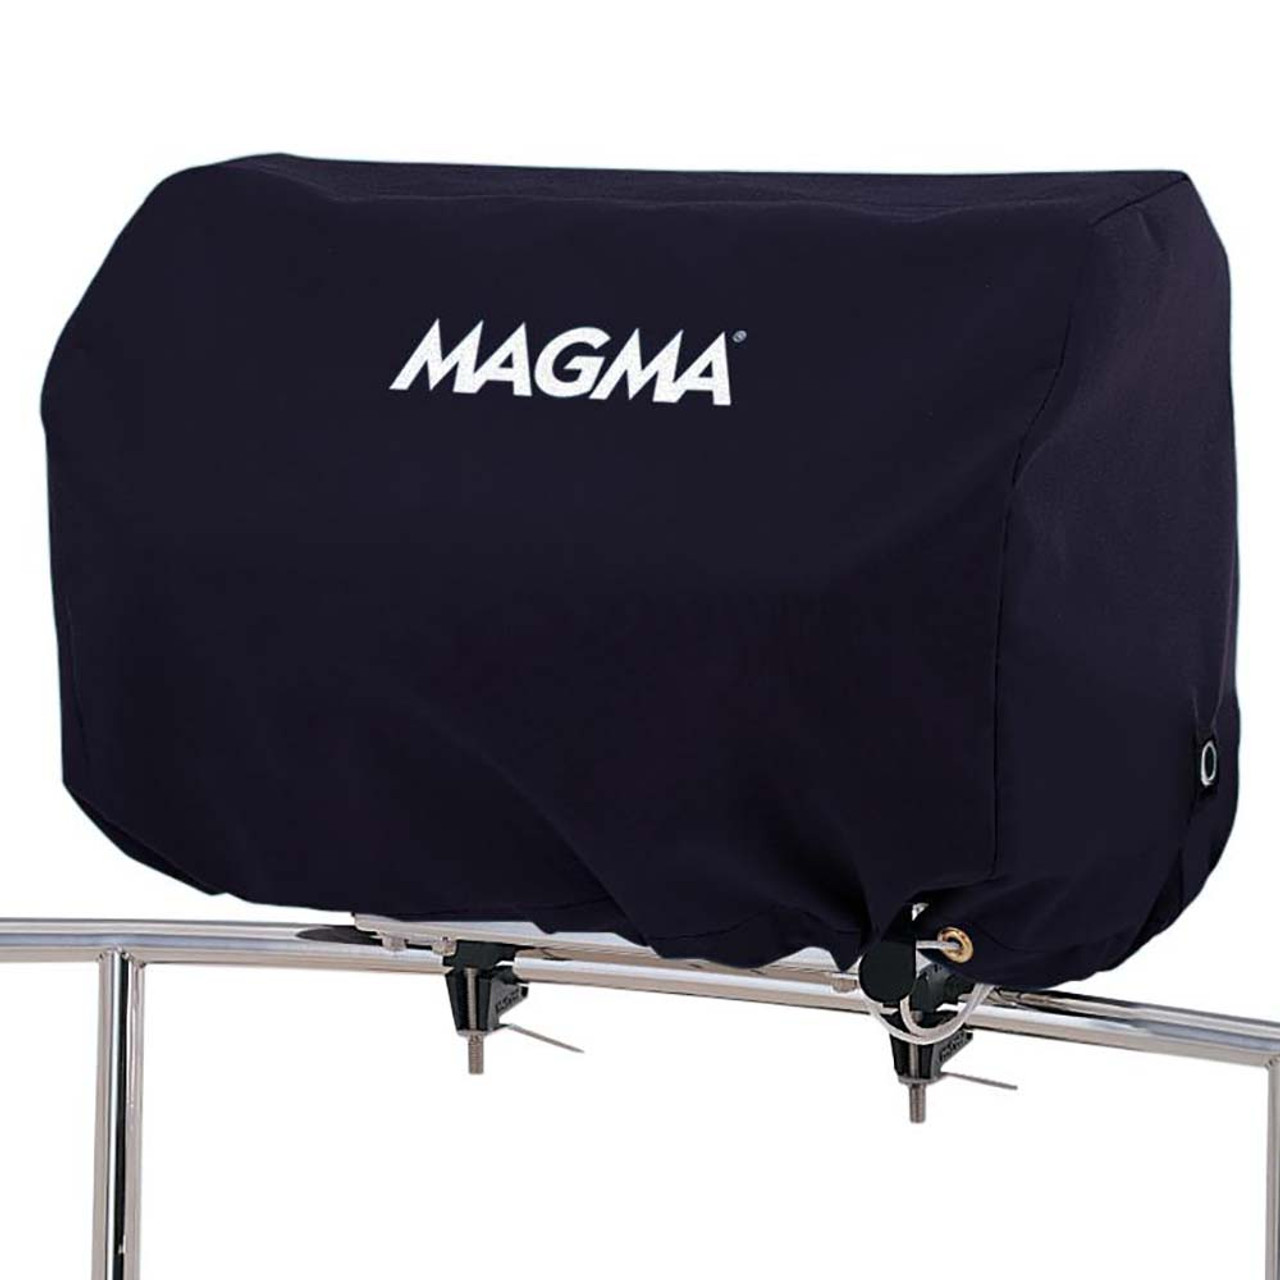 Magma Grill Cover f\/Catalina - Navy Blue - 12" x 18" [A10-1290CN]